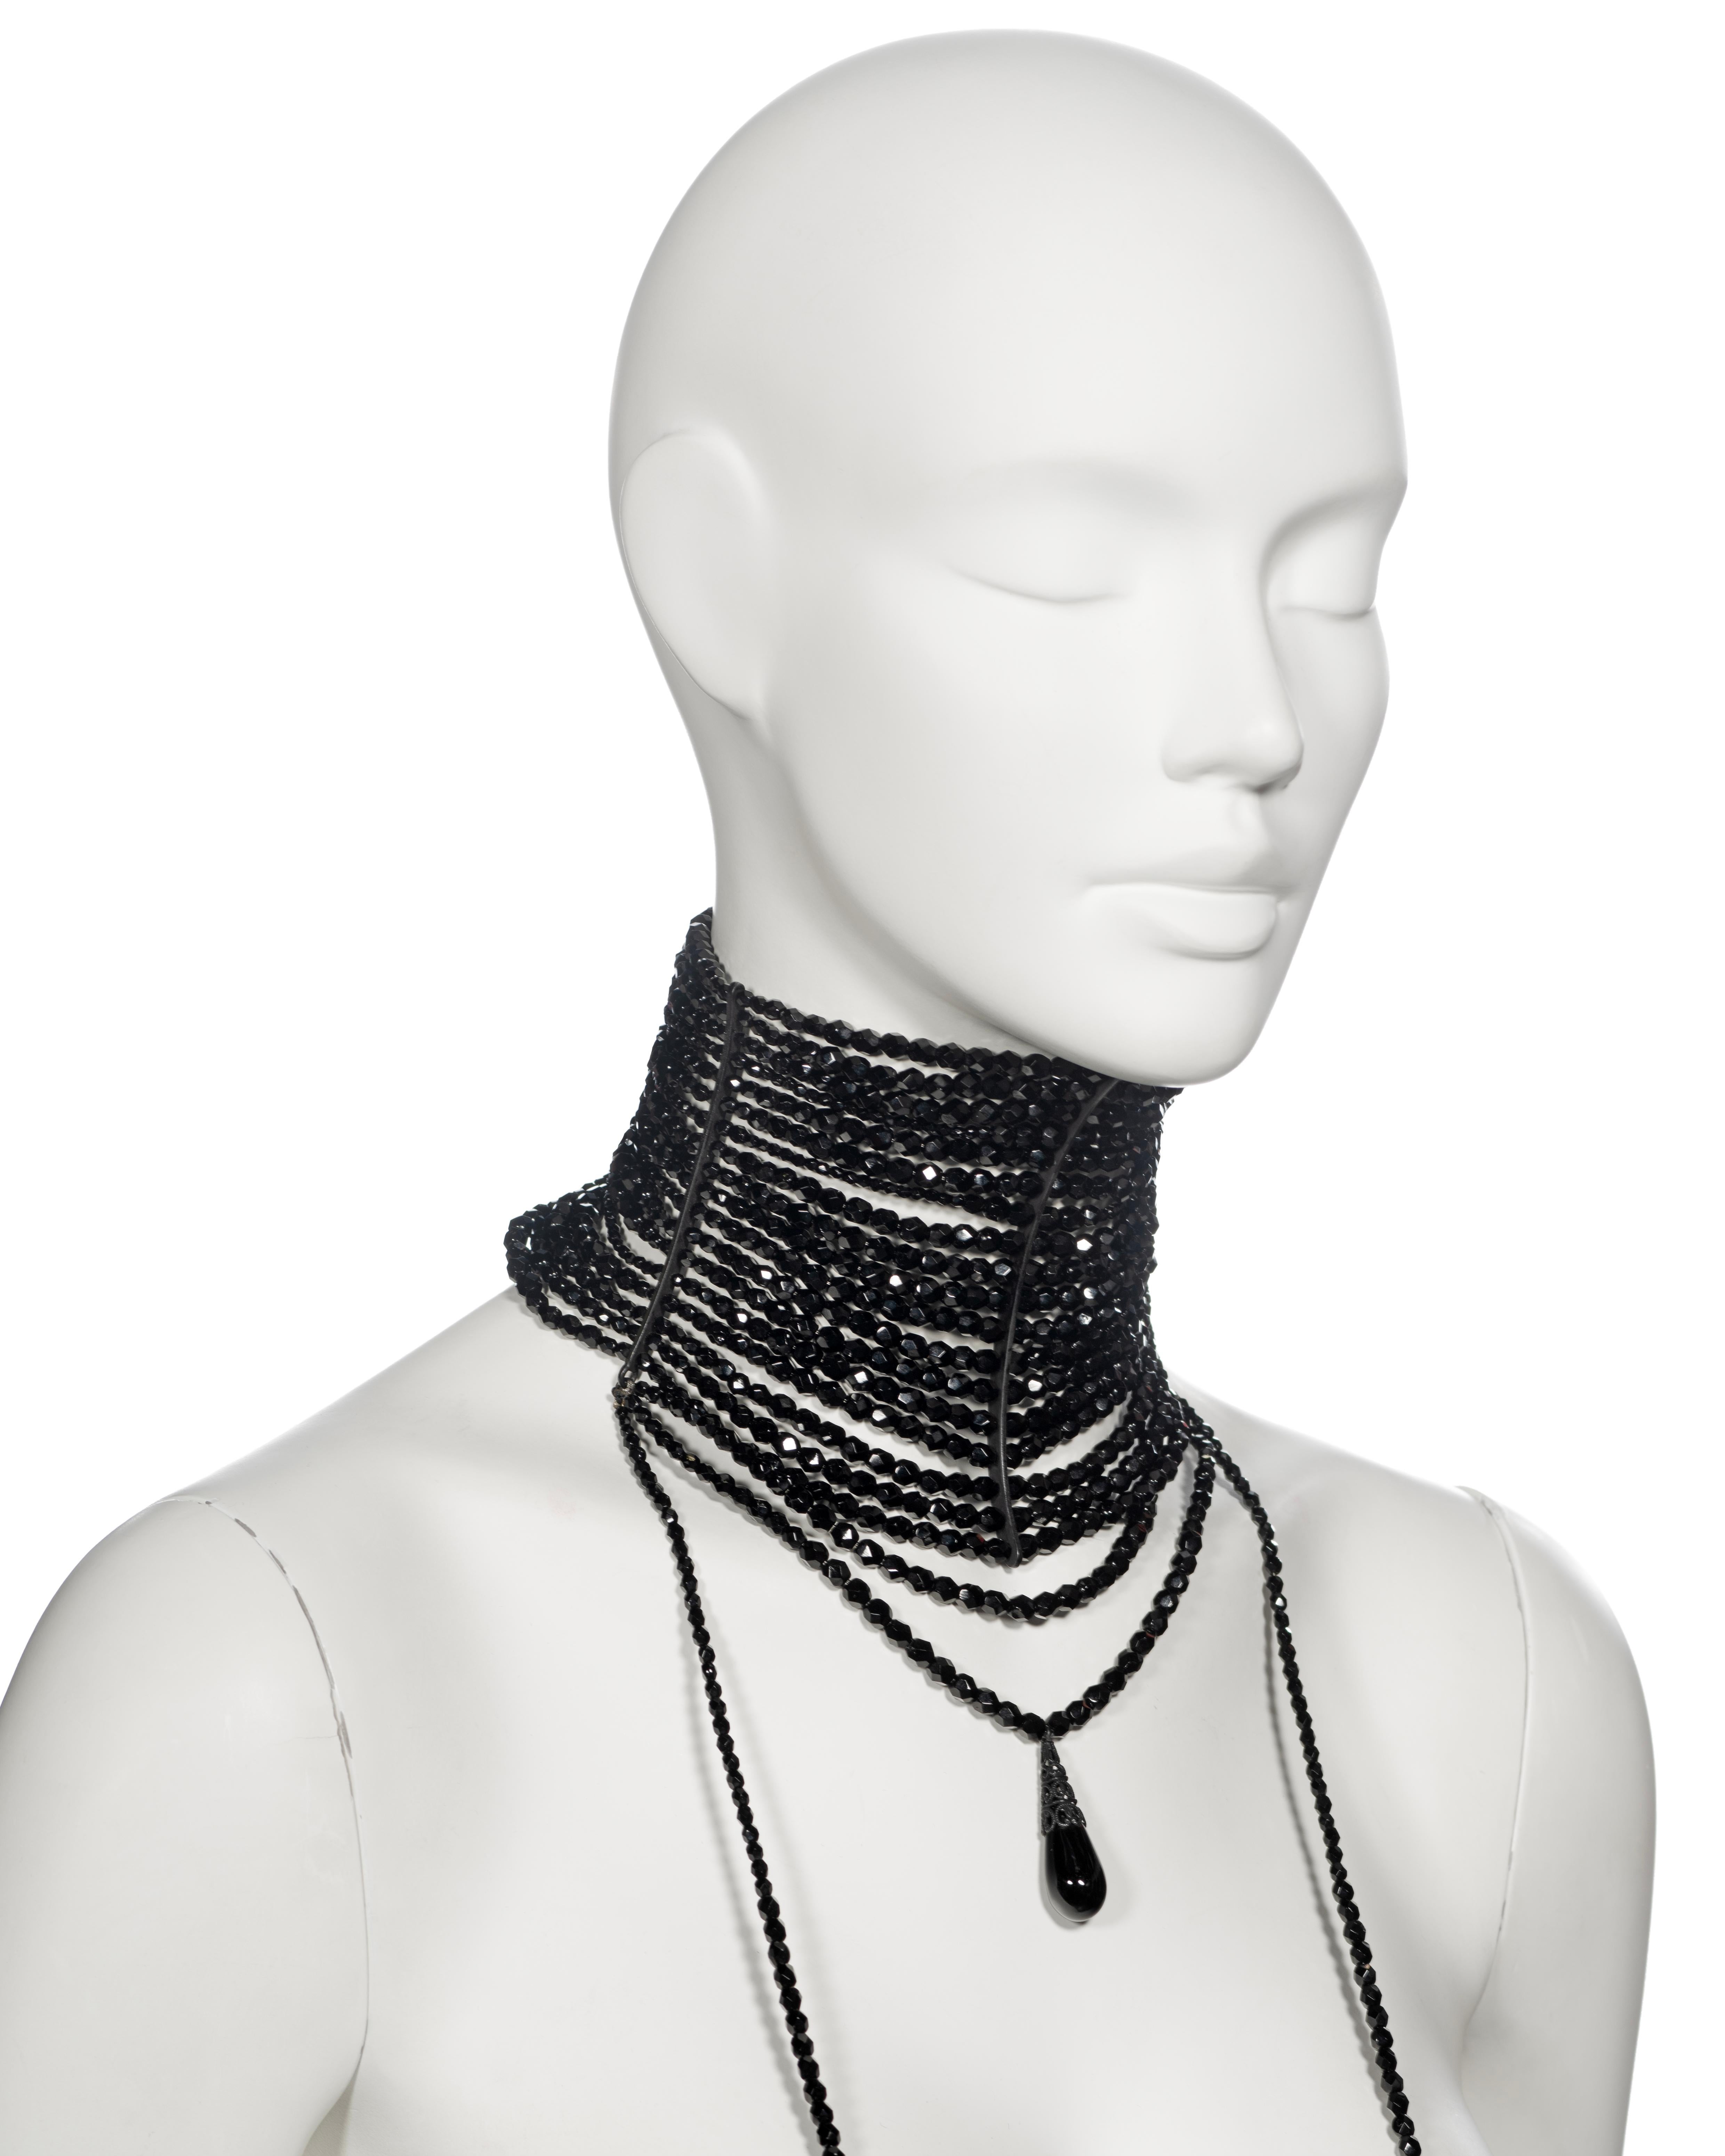 Christian Dior by John Galliano black beaded Masai choker necklace, ss 1999 For Sale 5